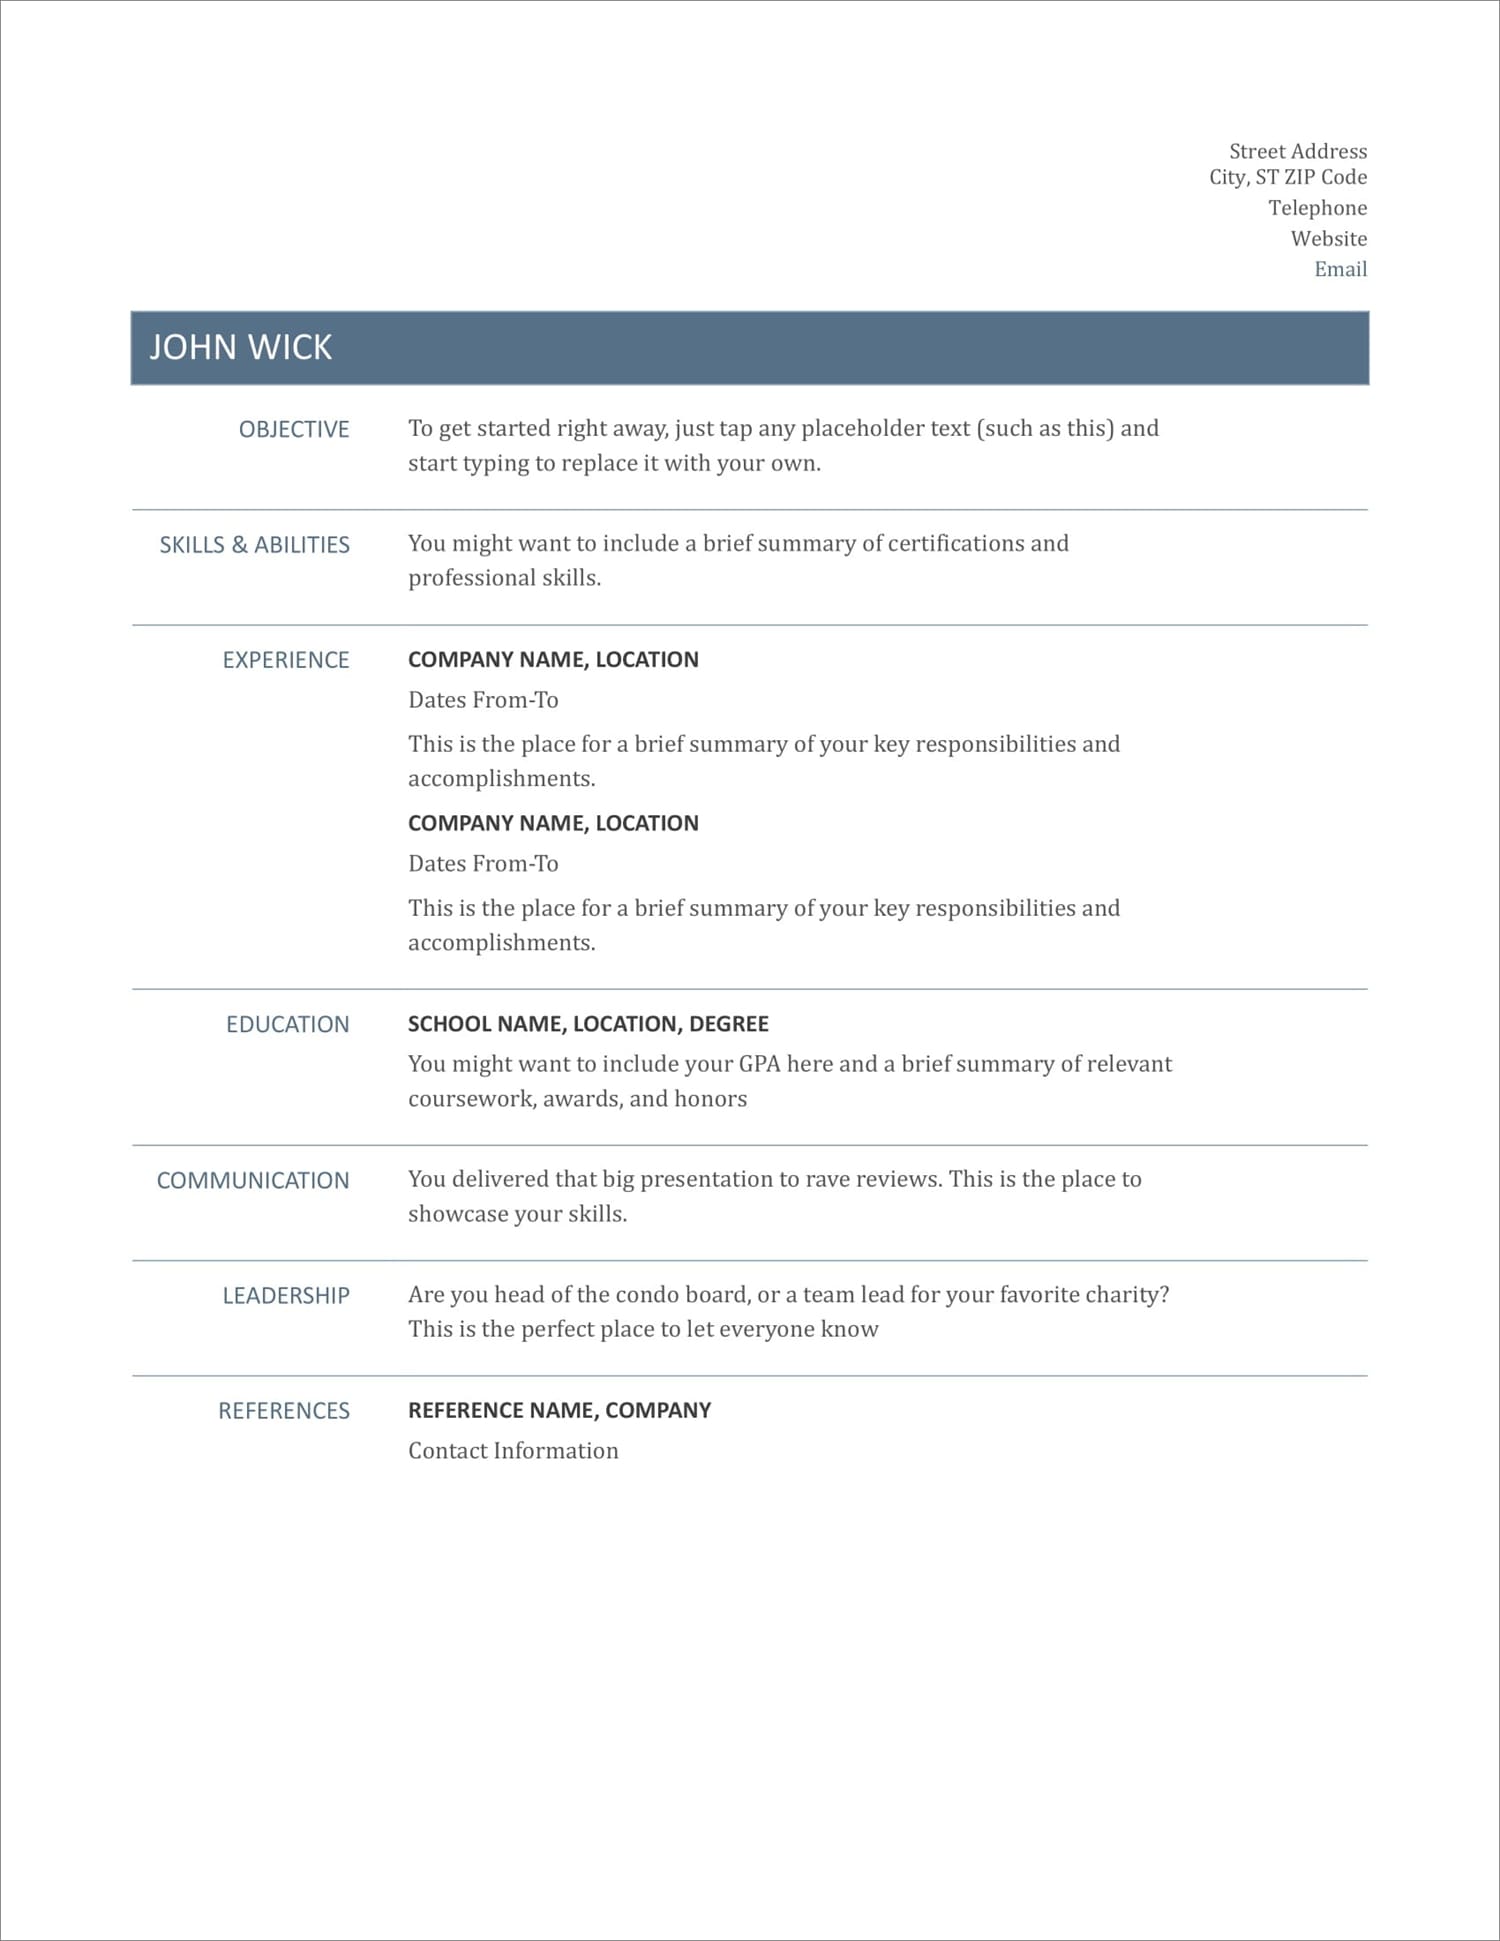 Simple Resume Sample Format from cdn-images.zety.com